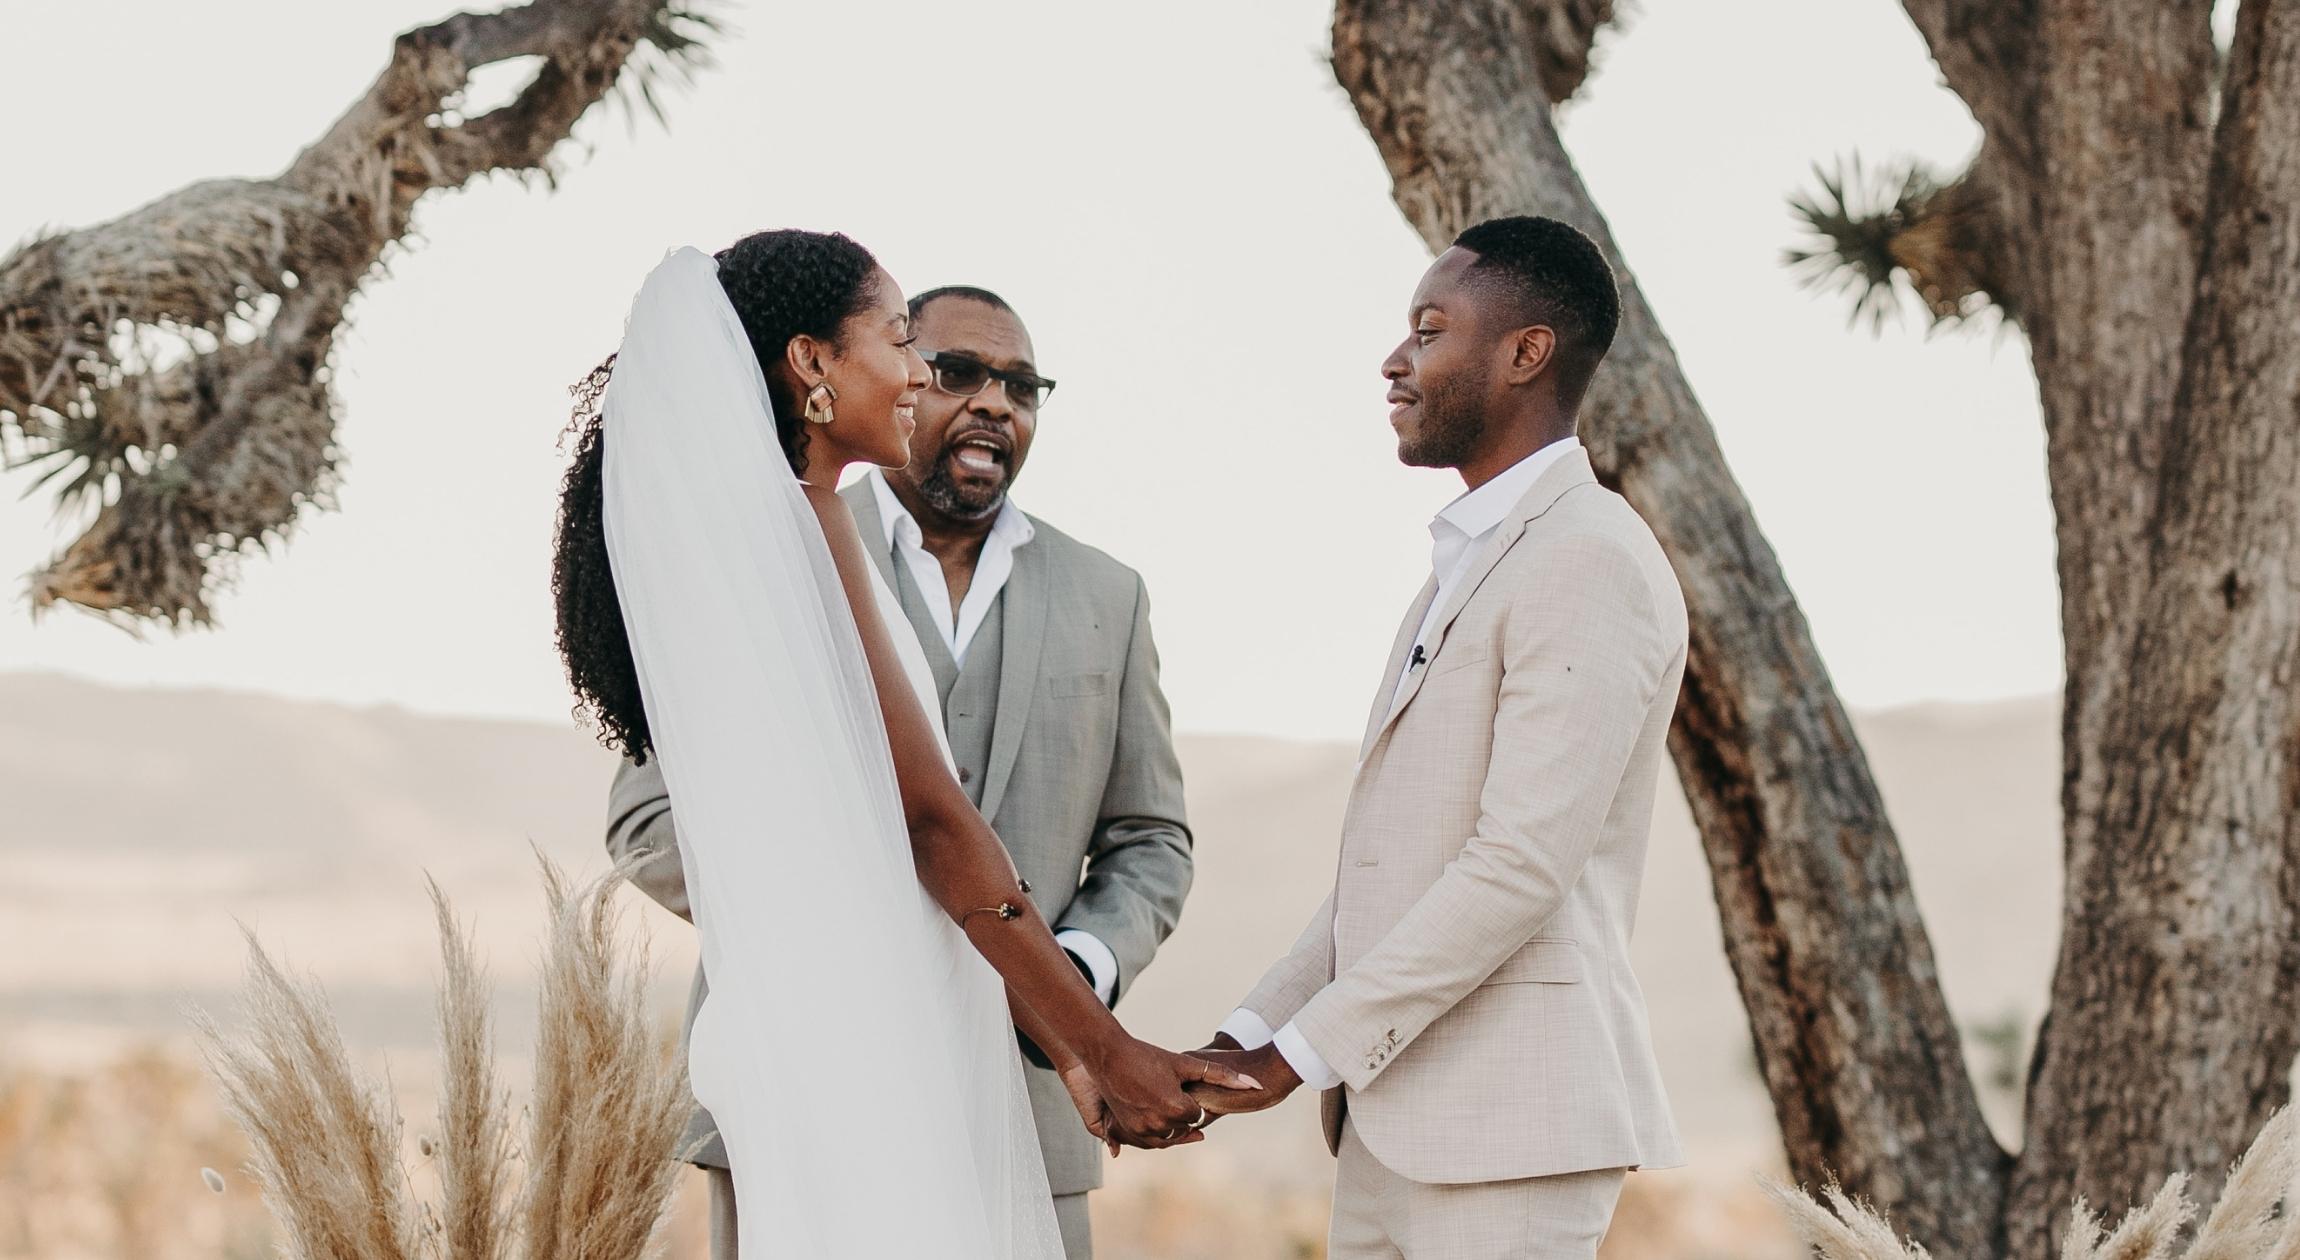 A Black couple gets married in the desert